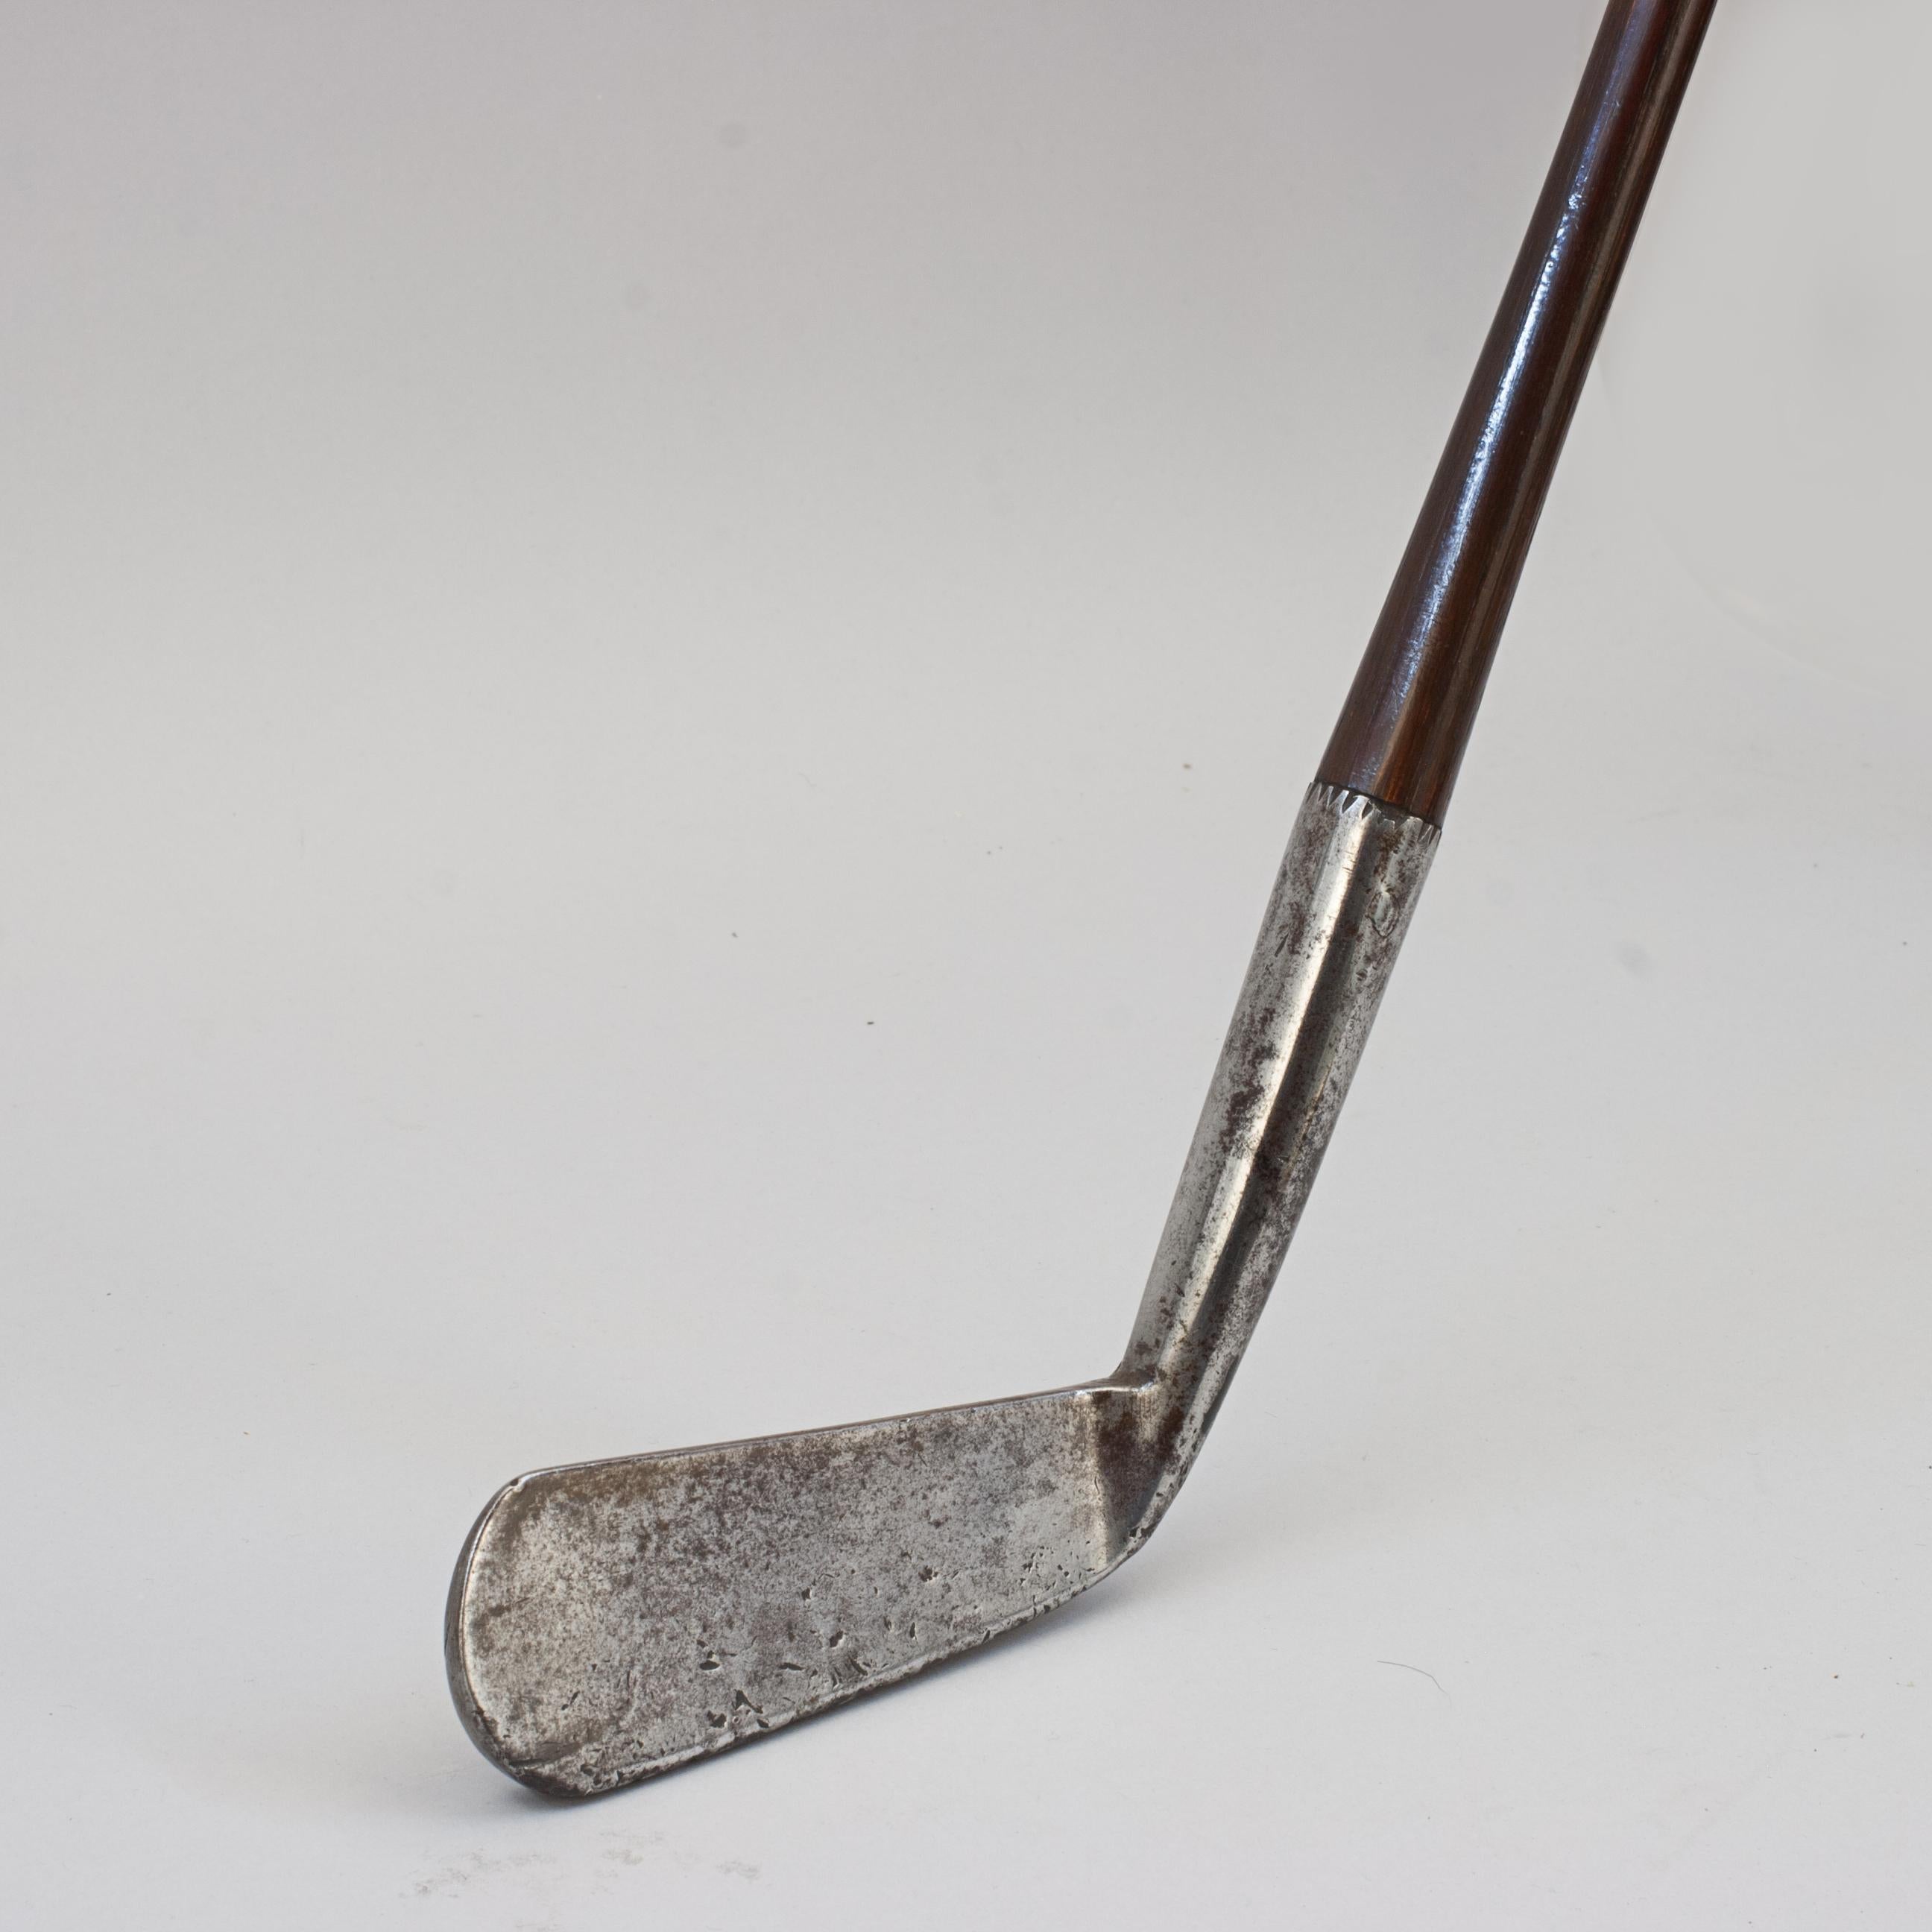 Antique Smooth Face Cleek, Golf Club.
This early hickory shafted iron has a smooth face, original hickory shaft, that has been shortened, and later polished leather grip. This is a fine example of a fairly early lofting iron. The maker is unknown as